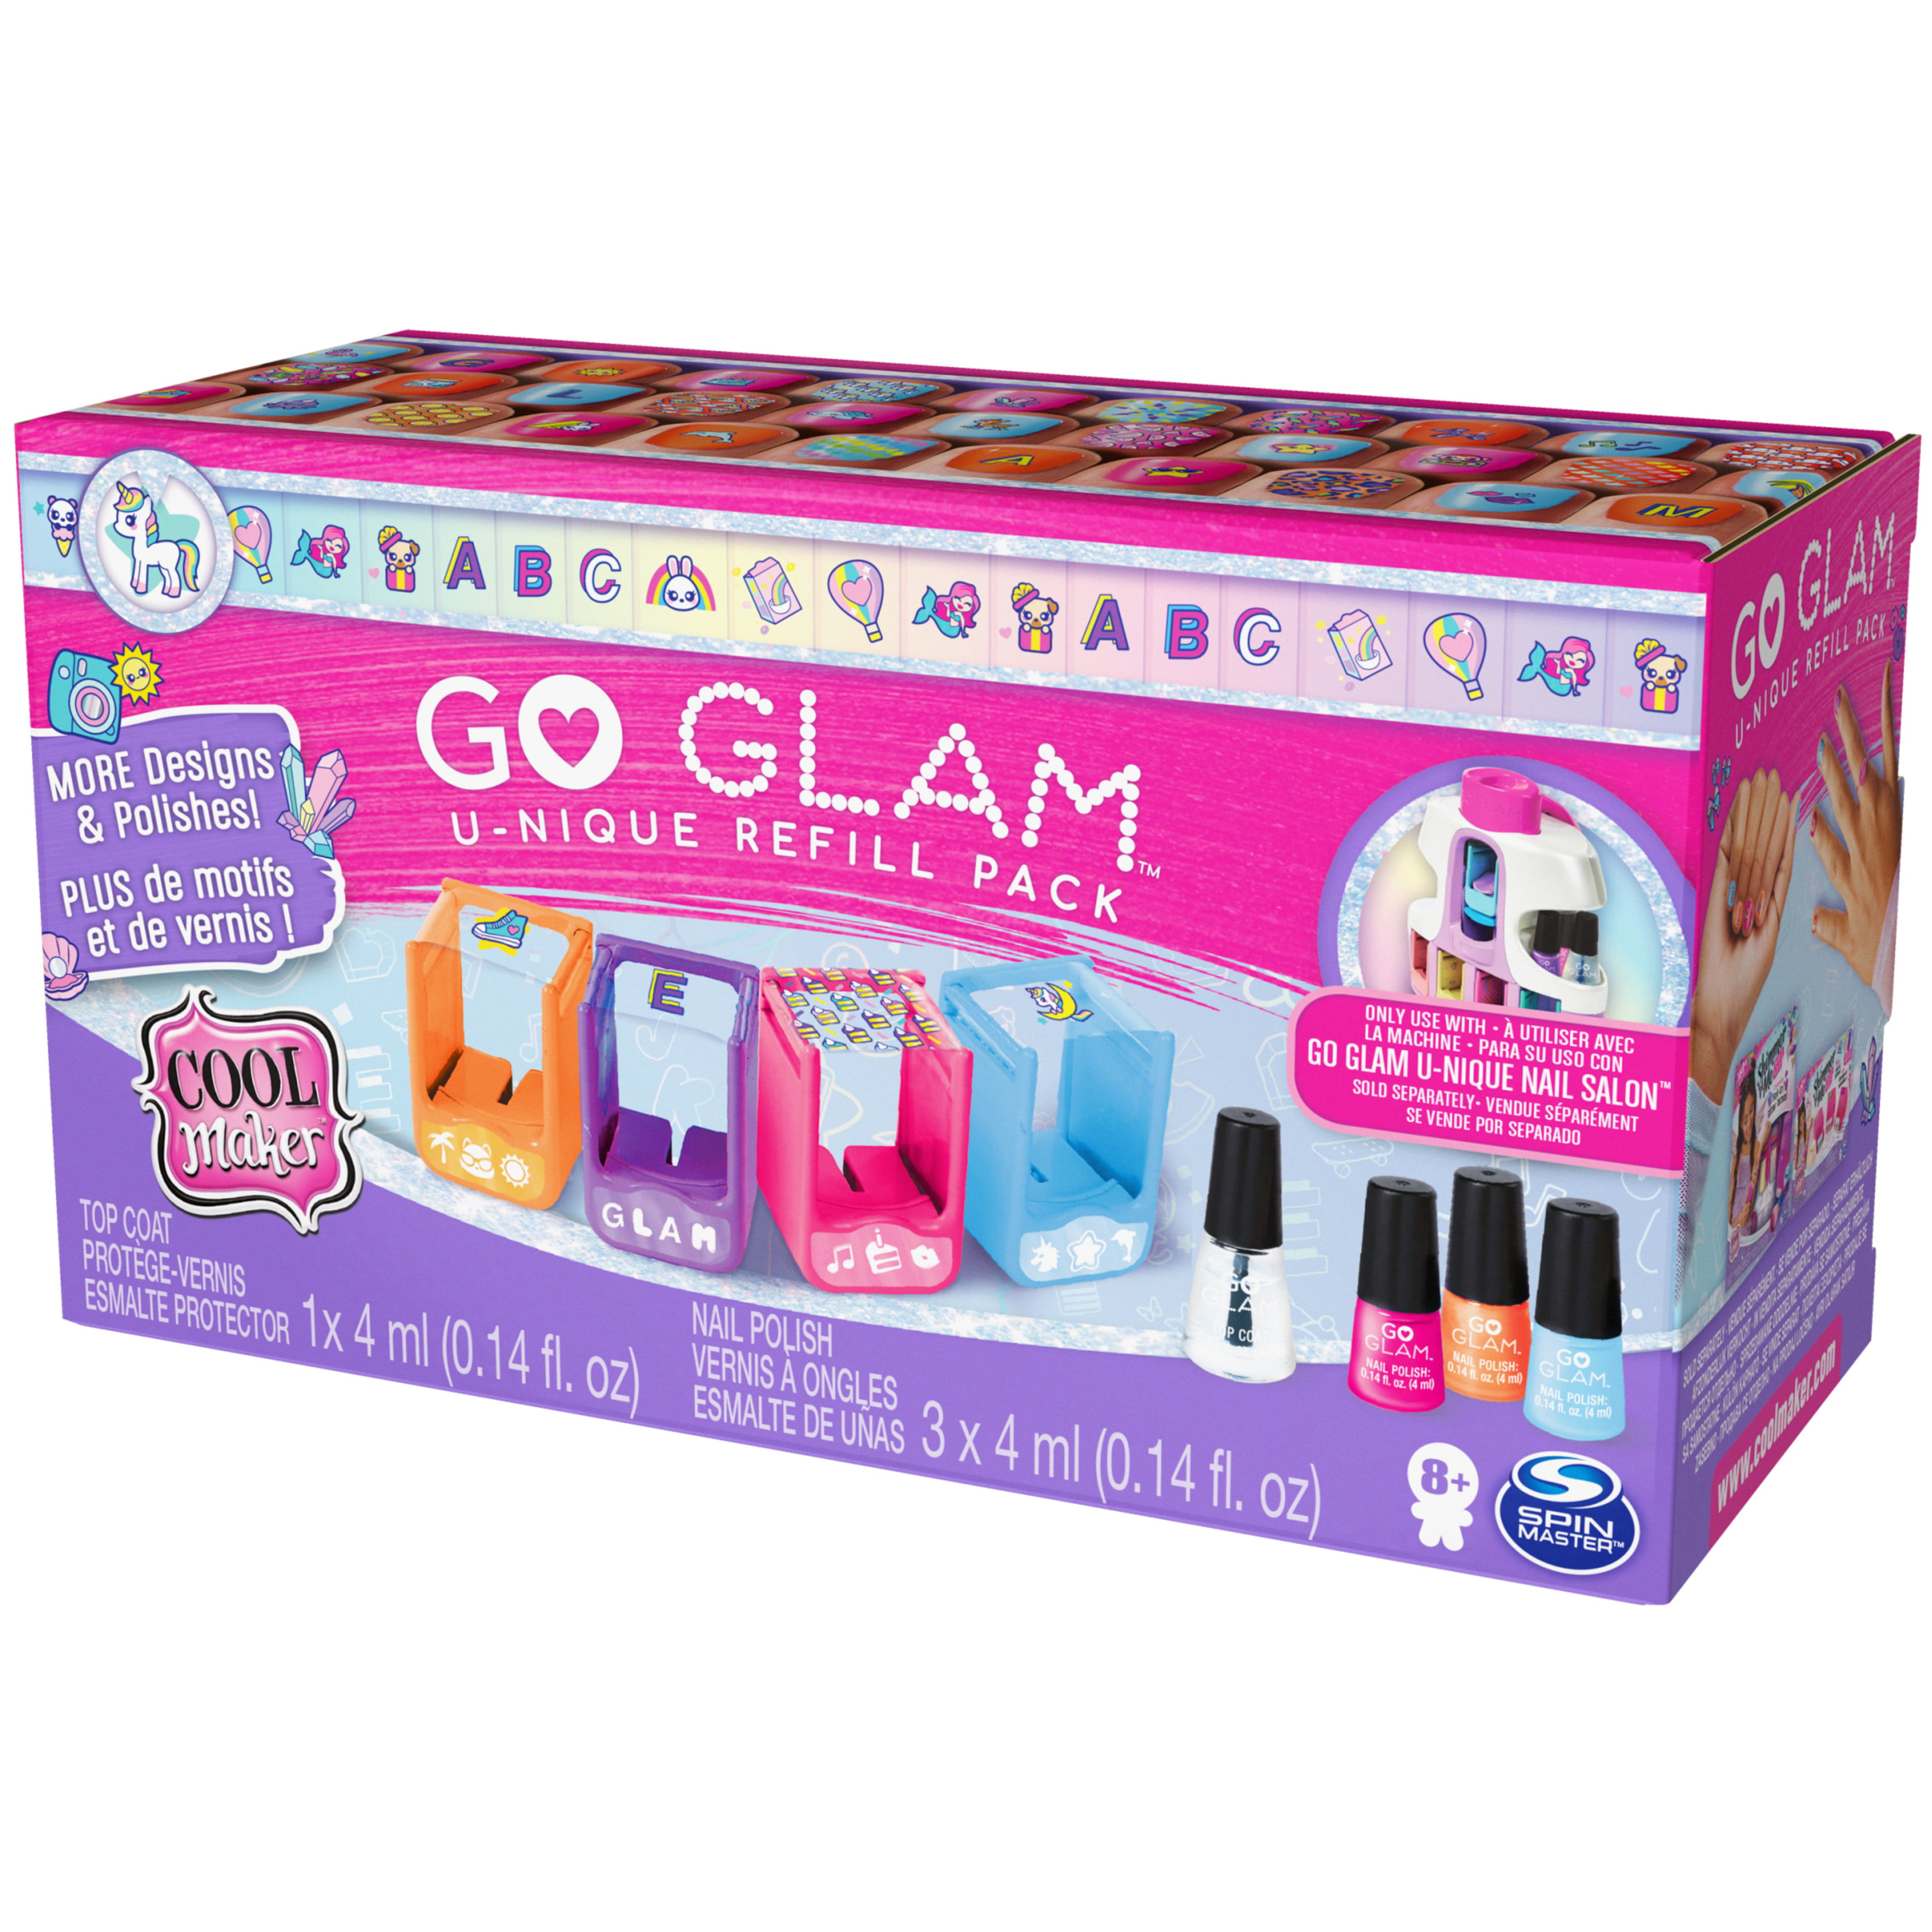 COOL Maker 6046865 Go Glam Nails Fashion Packs Assortment (Styles May  Vary-One Supplied), Multicolored